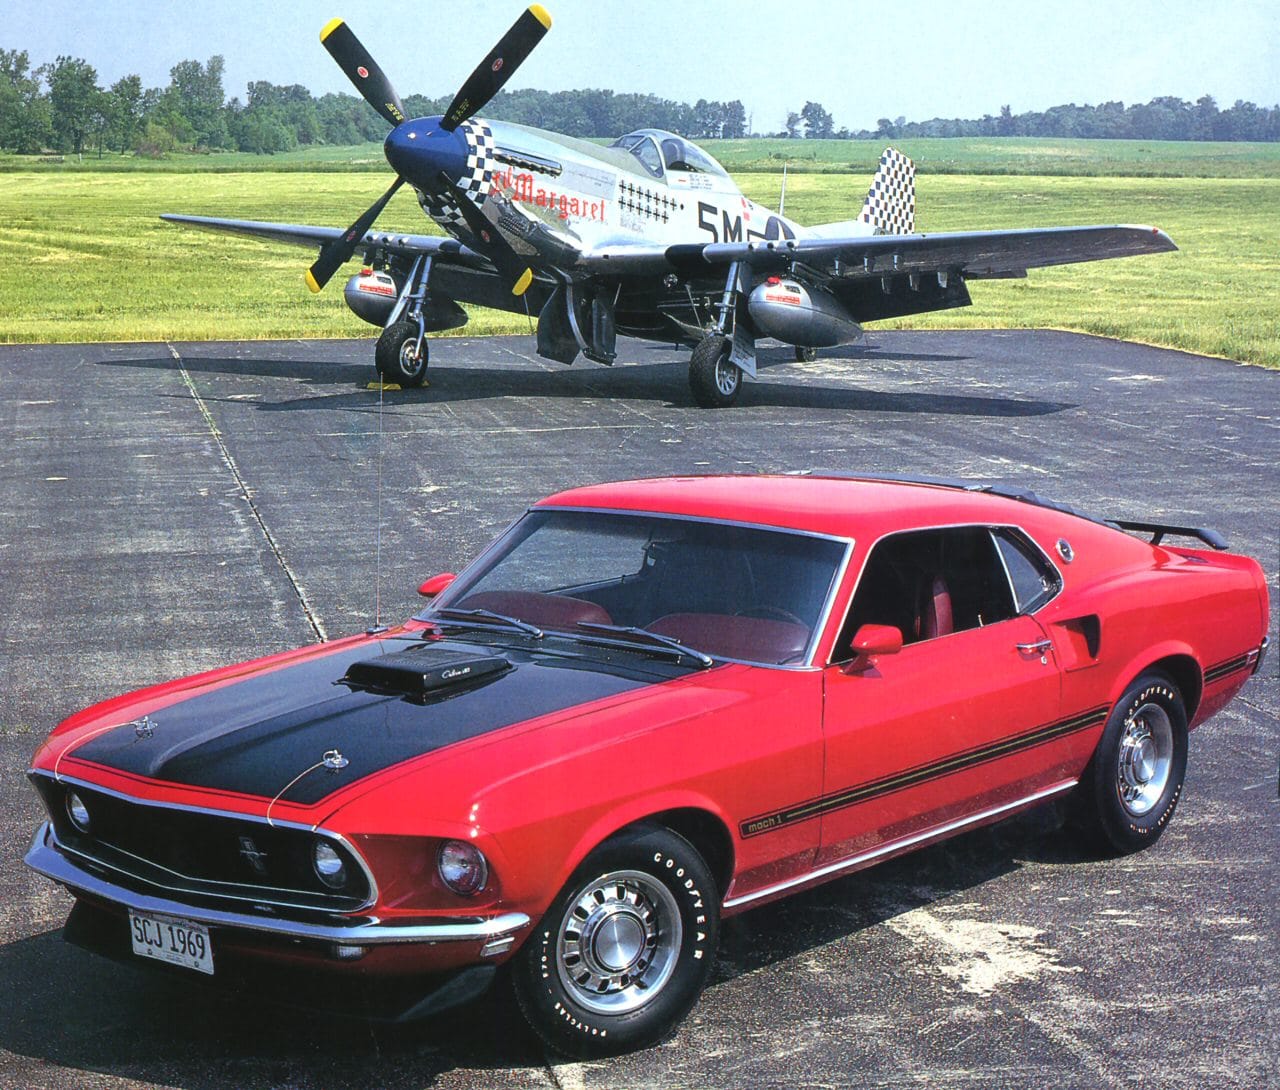 1969_Ford_Mustang_Mach_1_SportsRoof_428_Cobra_Je_t_w_P_51_Mustang_Fighter_Red_Frt_Qtr